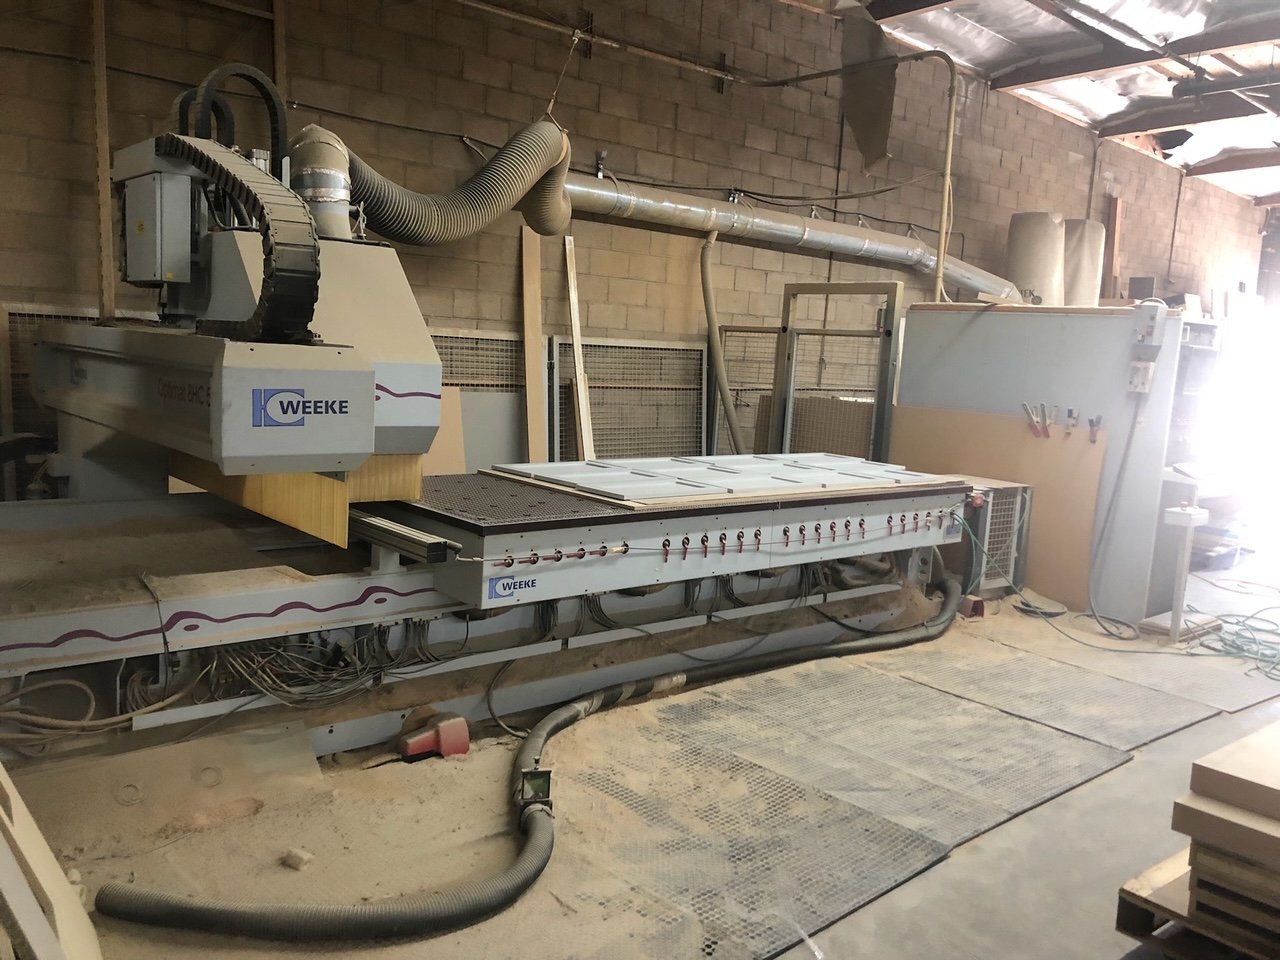 2002 Weeke OPTIMAT BHC 550 FLAT TABLE CNC ROUTER – New Listing More Details Coming!